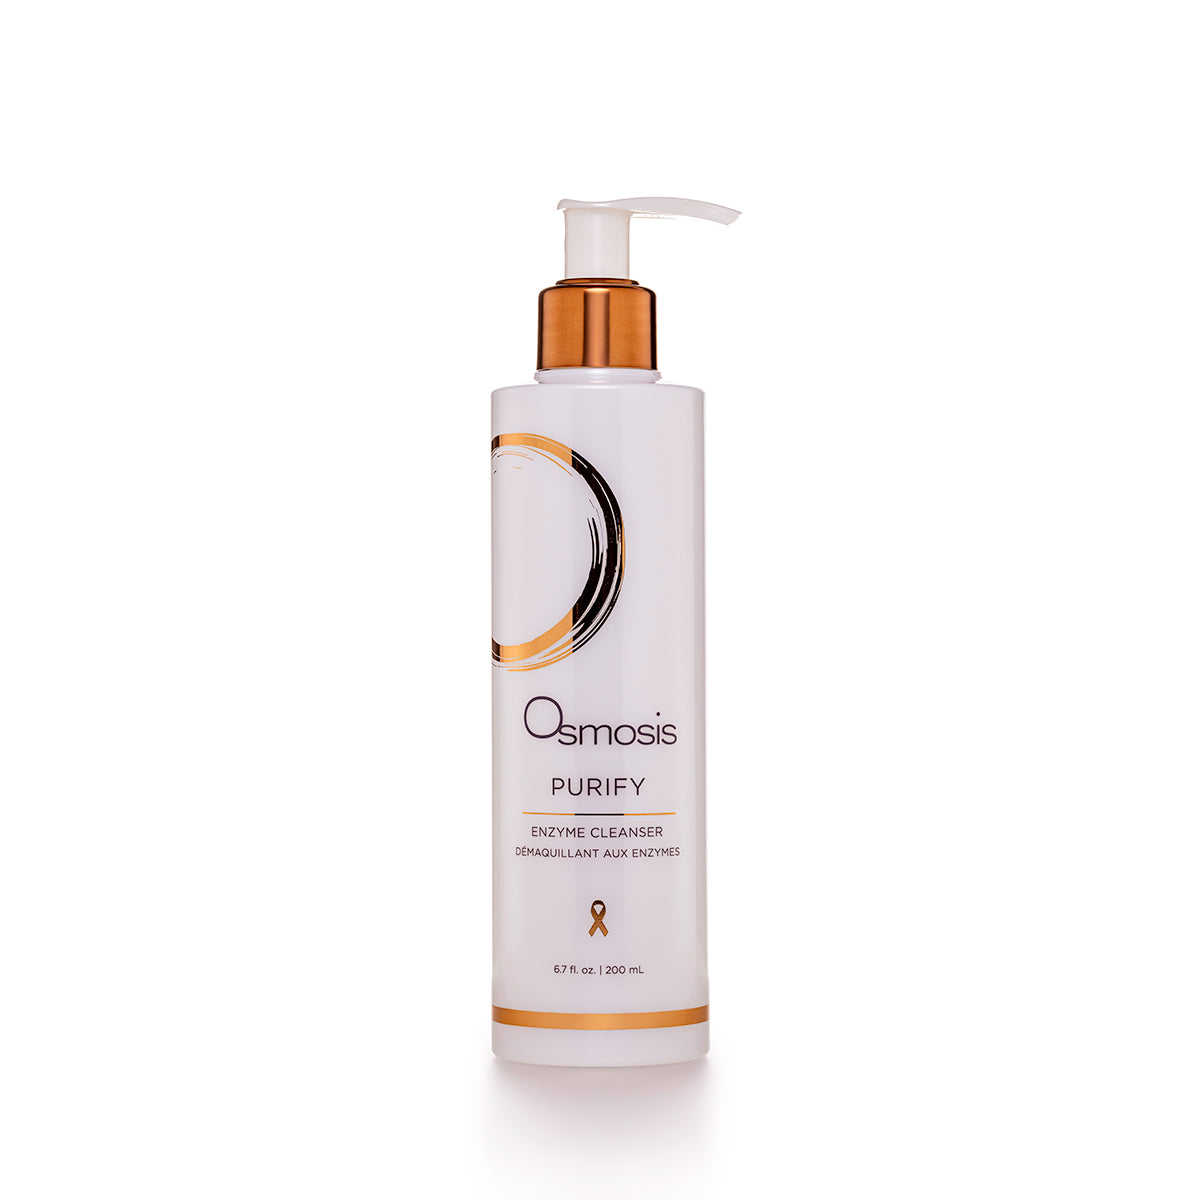 Osmosis Purify Enzyme Cleanser uses pineapple enzymes to gentle exfoliate while cleansing the skin.